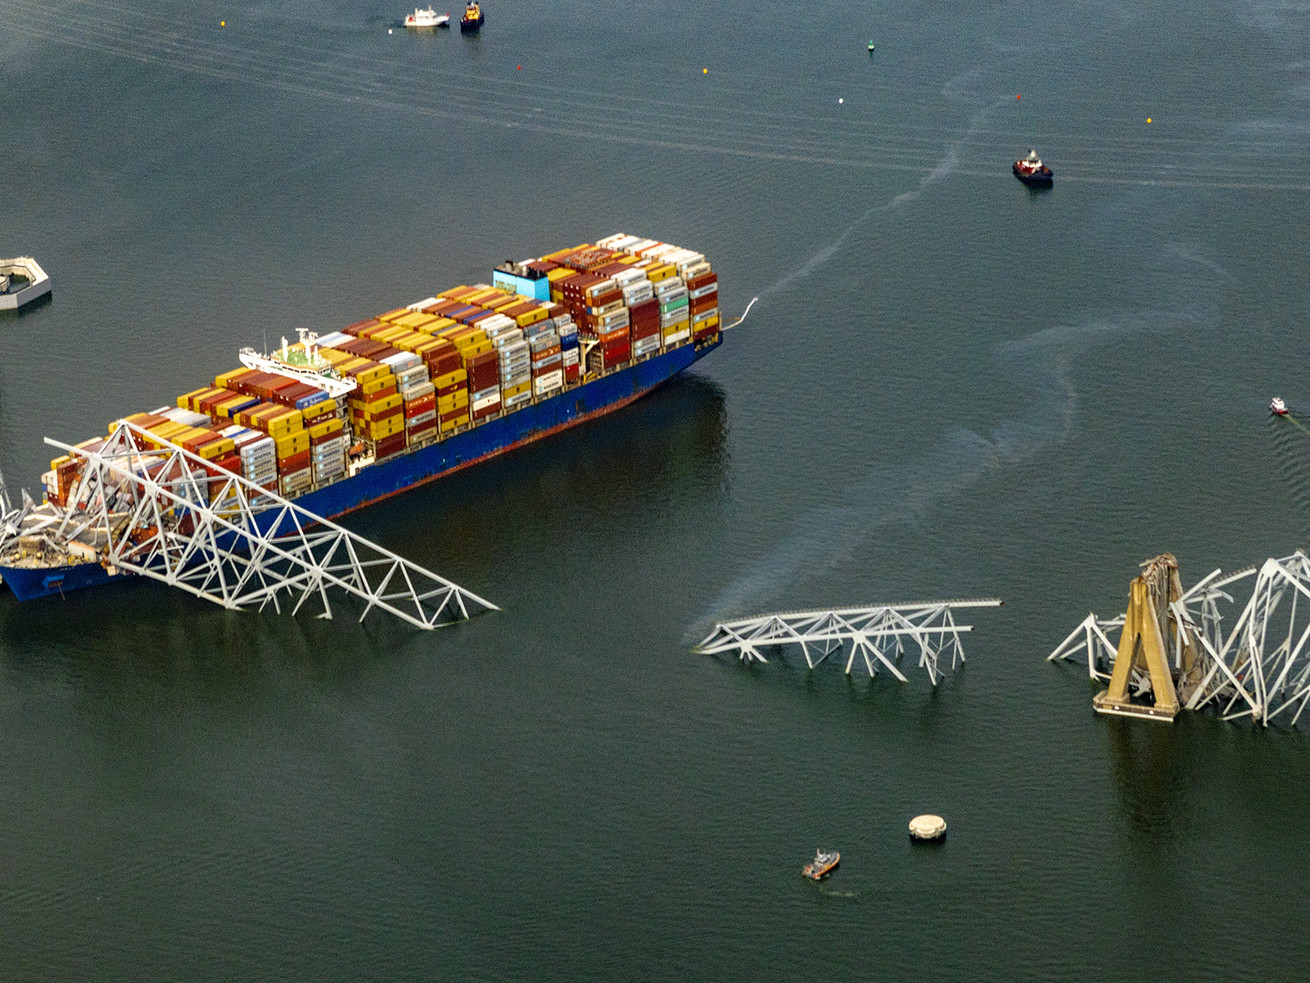 Baltimore’s Francis Scott Key Bridge Collapses After Being Struck By Cargo Ship